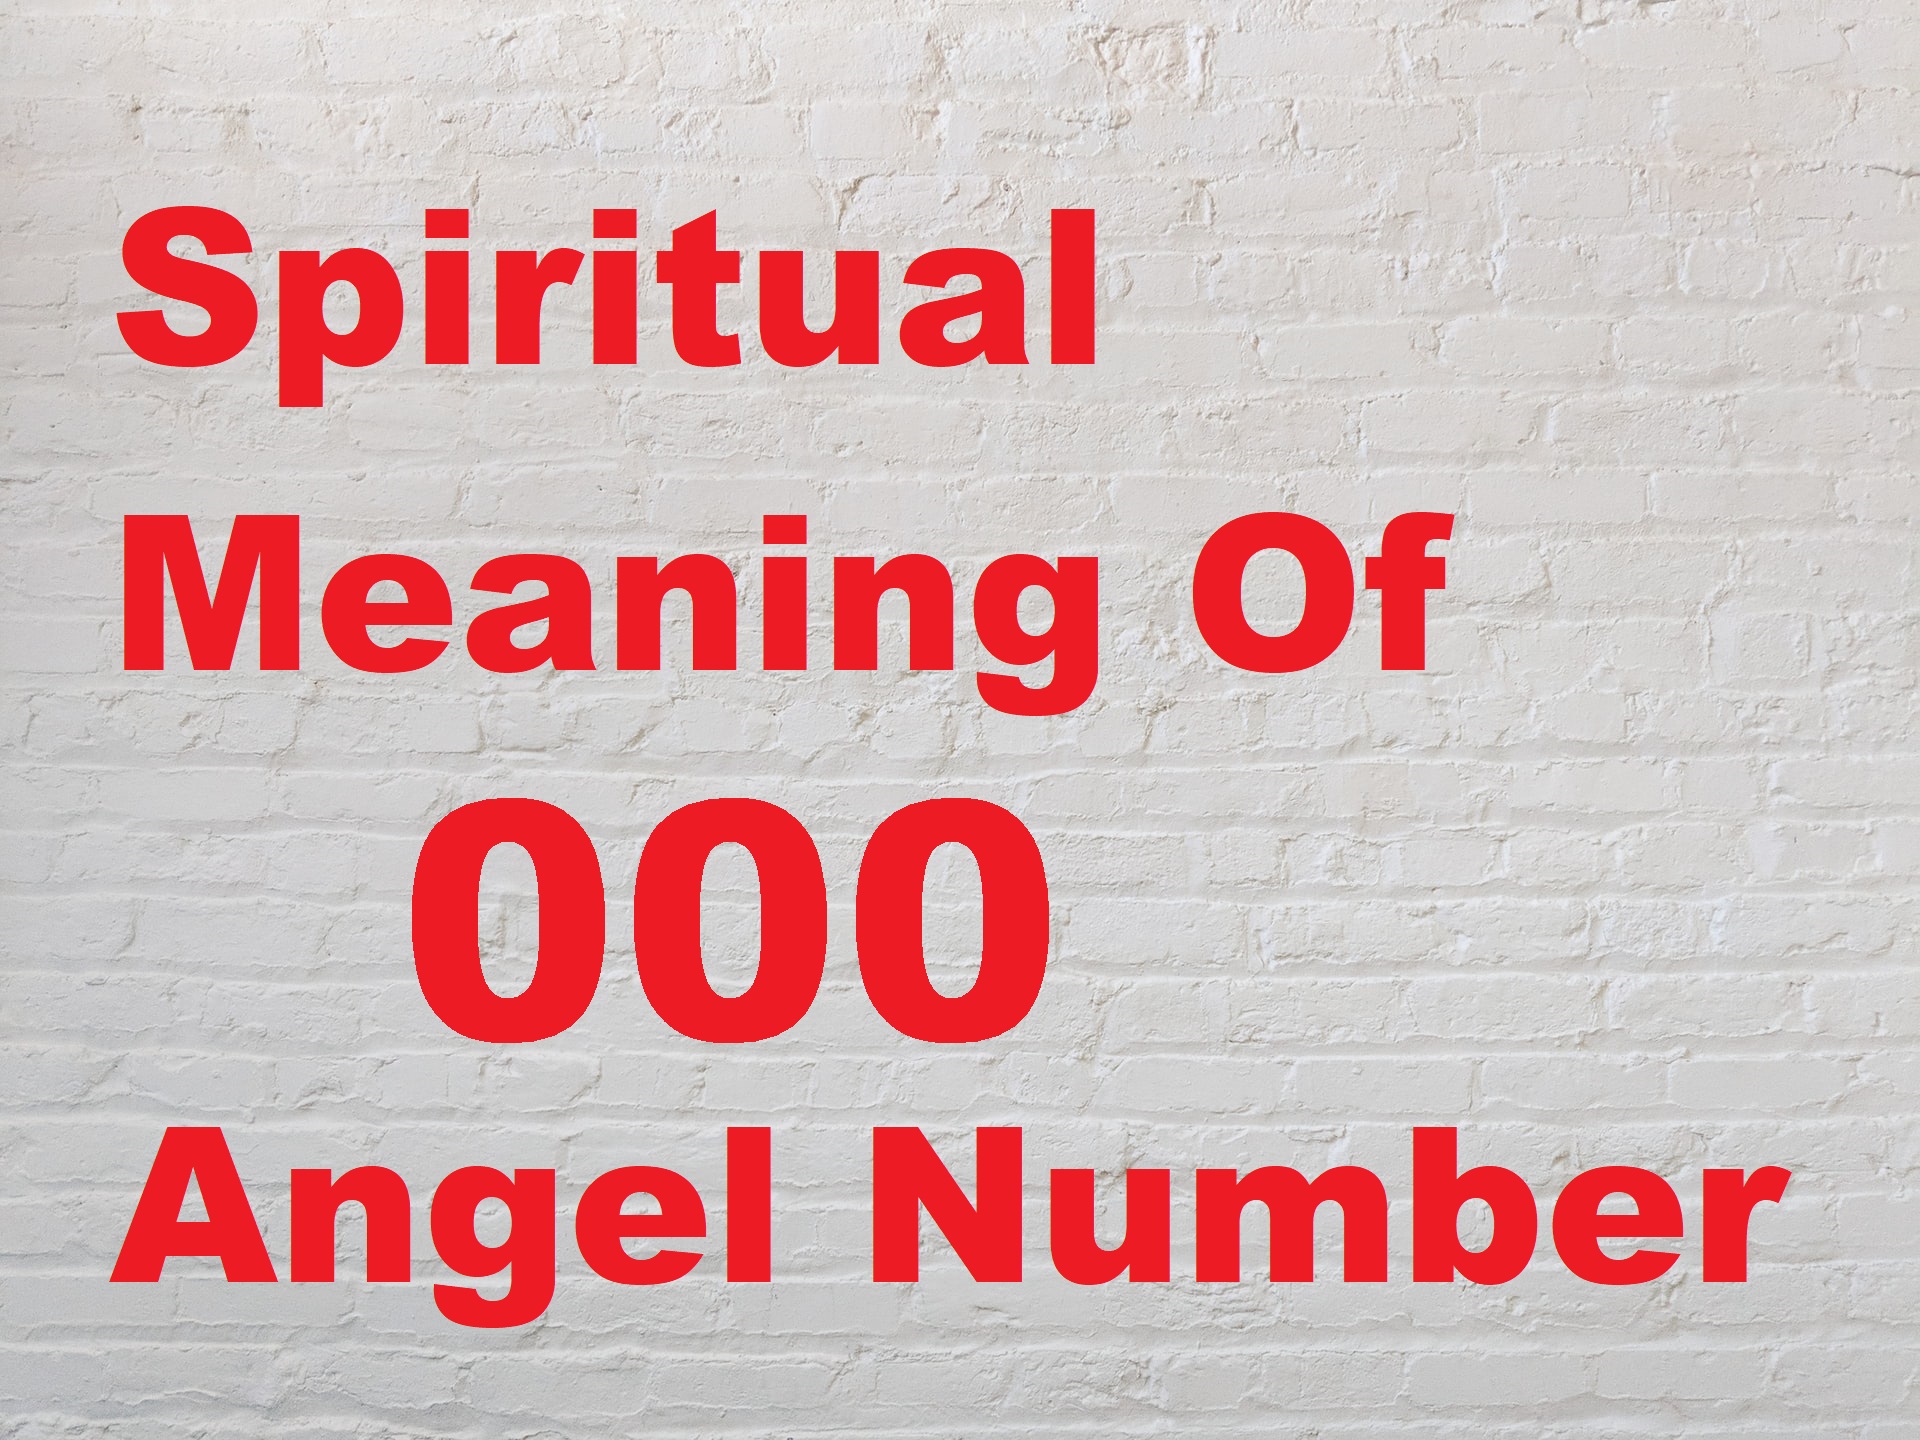 Spiritual Meaning Of 000 Angel Number text in red font color written on a white brick background